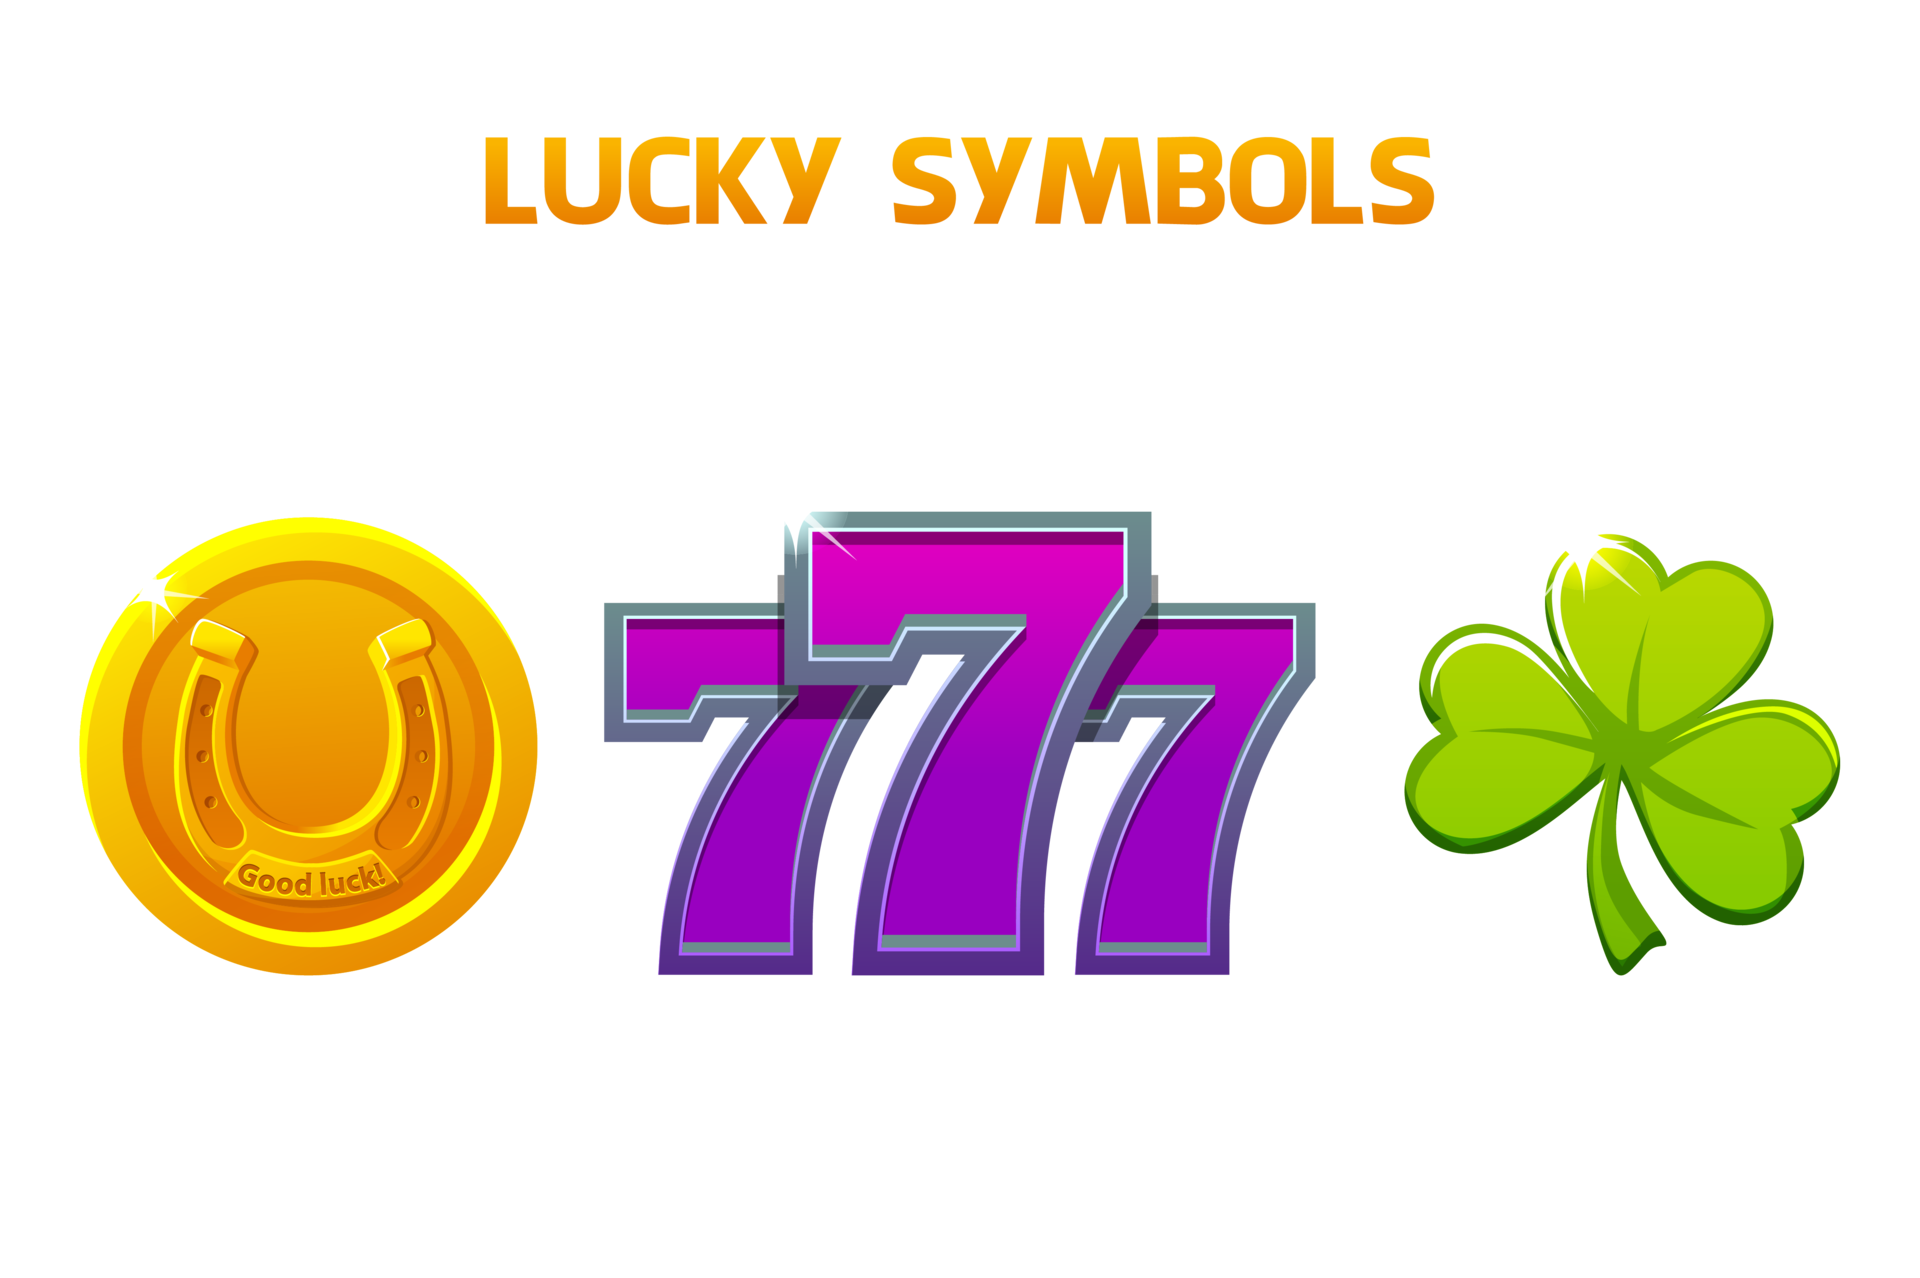 Lucky symbols - seven, clover and horseshoe. Icons for slots and casino ...